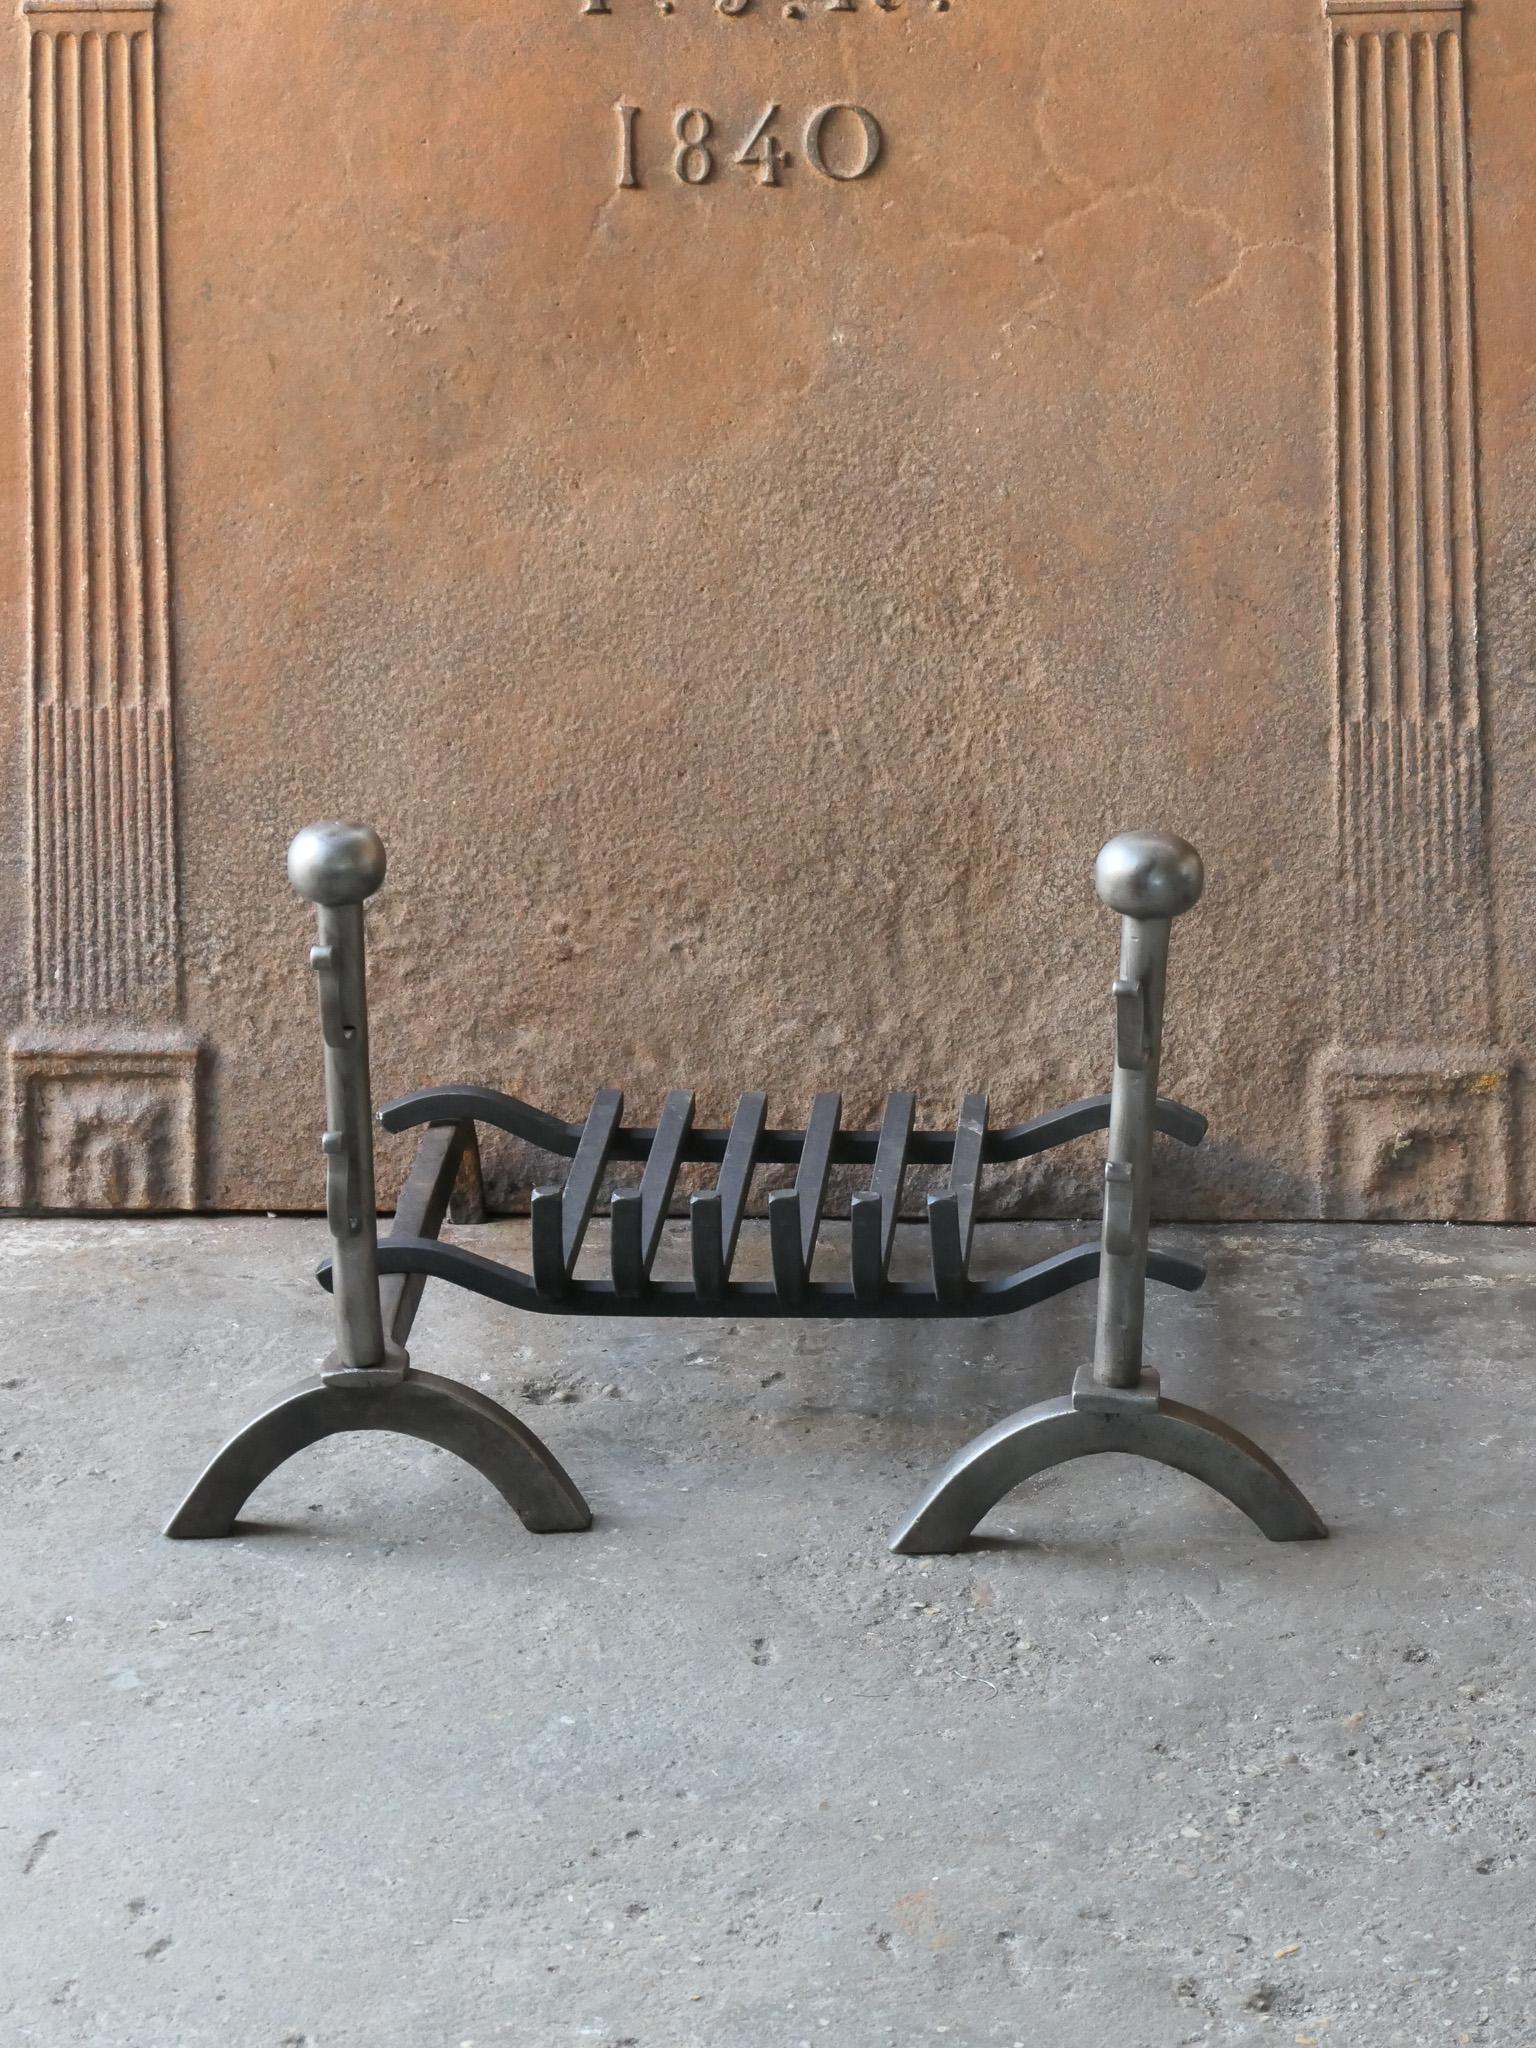 20th century French Napoleon III style fireplace basket, fire basket made of wrought iron and cast iron. The basket is in a good condition and is fully functional.

Width at front is 60 cm (23.6 inches).